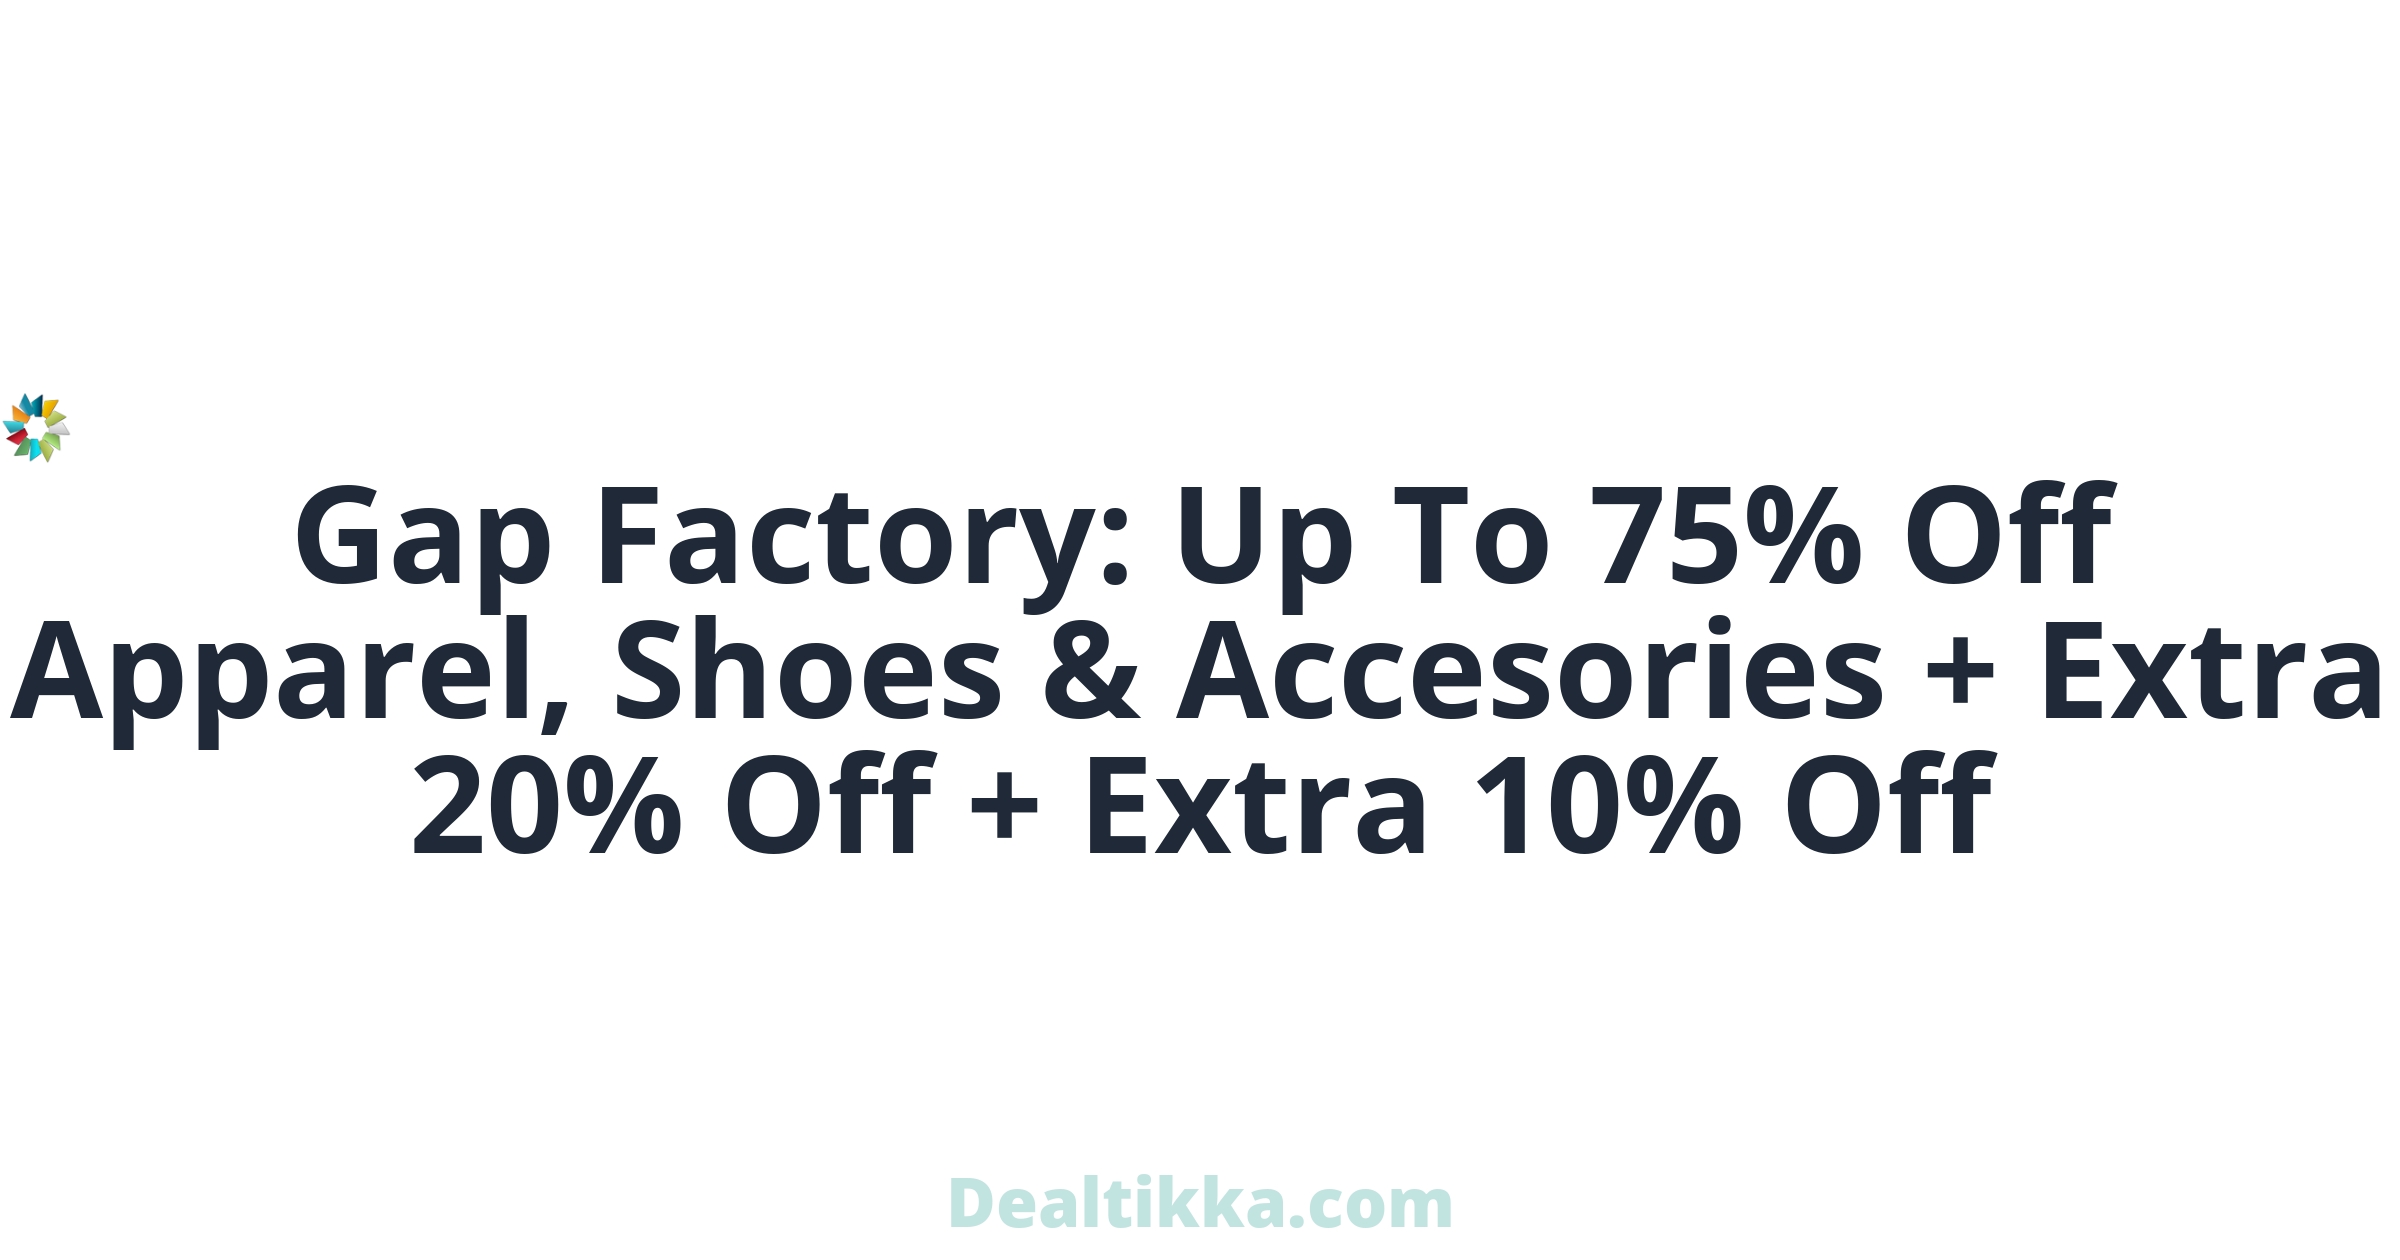 og?fontFamily=Roboto&title=Gap+Factory%3A+Up+To+75%25+Off+Apparel%2C+Shoes+%26+Accesories+%2B+Extra+20%25+Off+%2B+Extra+10%25+Off&titleTailwind=text-gray-800%20font-bold%20text-6xl&text=&textTailwind=text-gray-700%20text-2xl%20mt-4&logoUrl=https%3A%2F%2Fwww.dealtikka.com%2Fimg%2Fdt_80_80.png&logoTailwind=h-8&bgTailwind=bg-blueGray-200&footer=Dealtikka.com&footerTailwind=text-teal-600%20font-black%20opacity-25%20text-3xl&containerTailwind=border-white&t=1717382698576&refresh=1